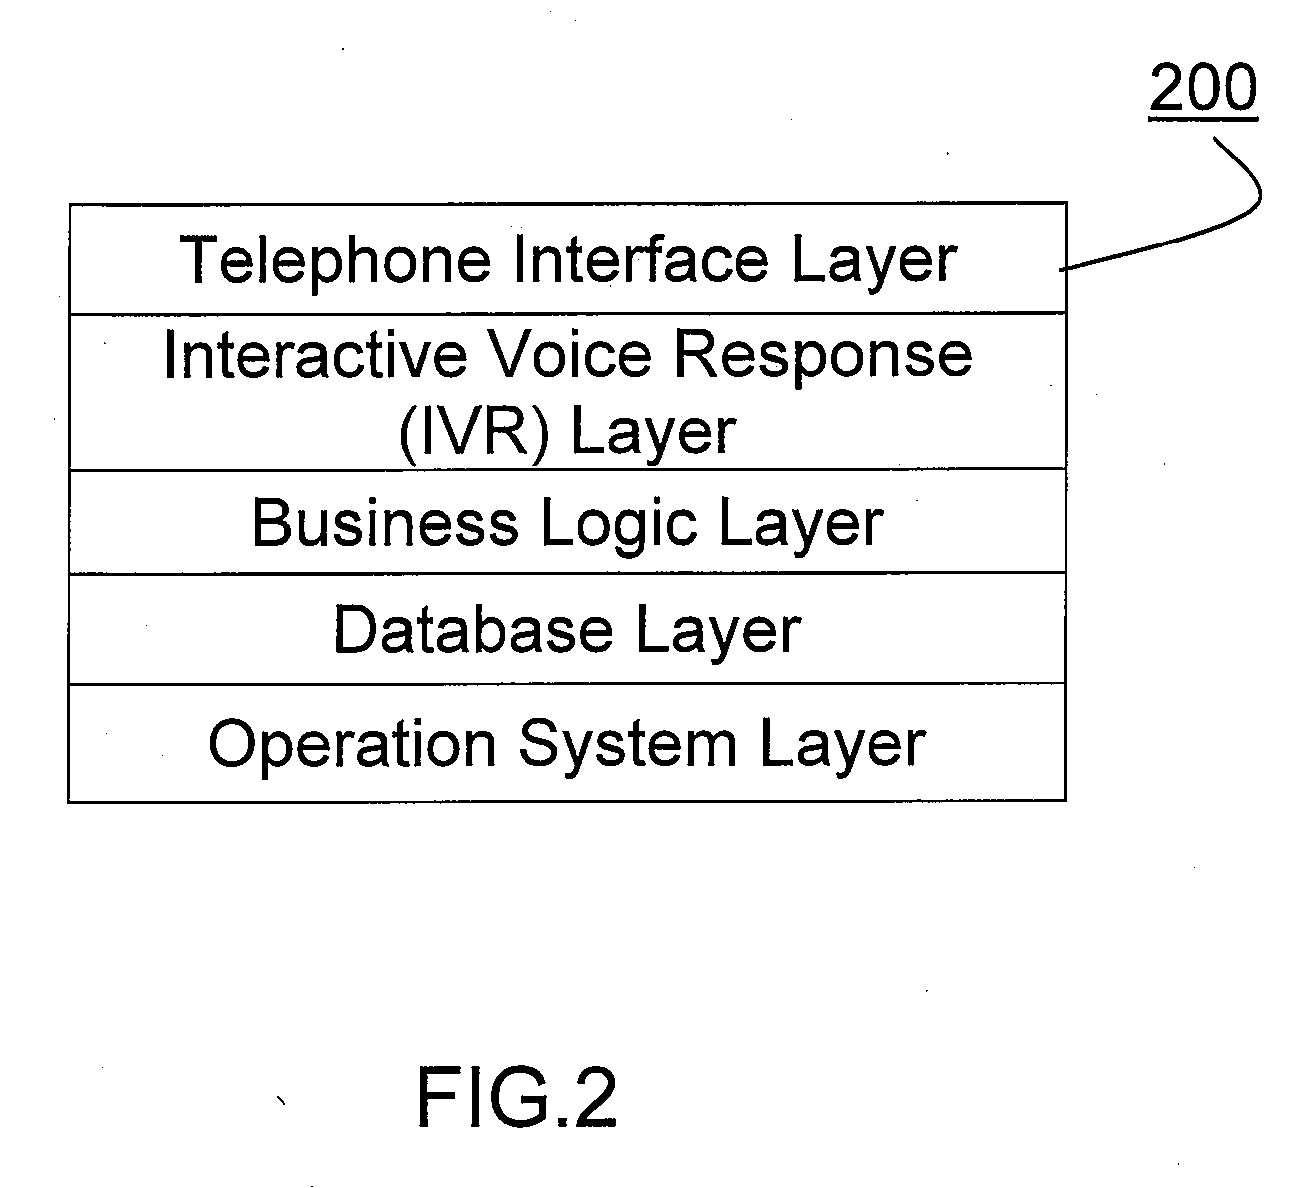 Method and system to provide electronic parking validation for drivers using a pay by cell parking system